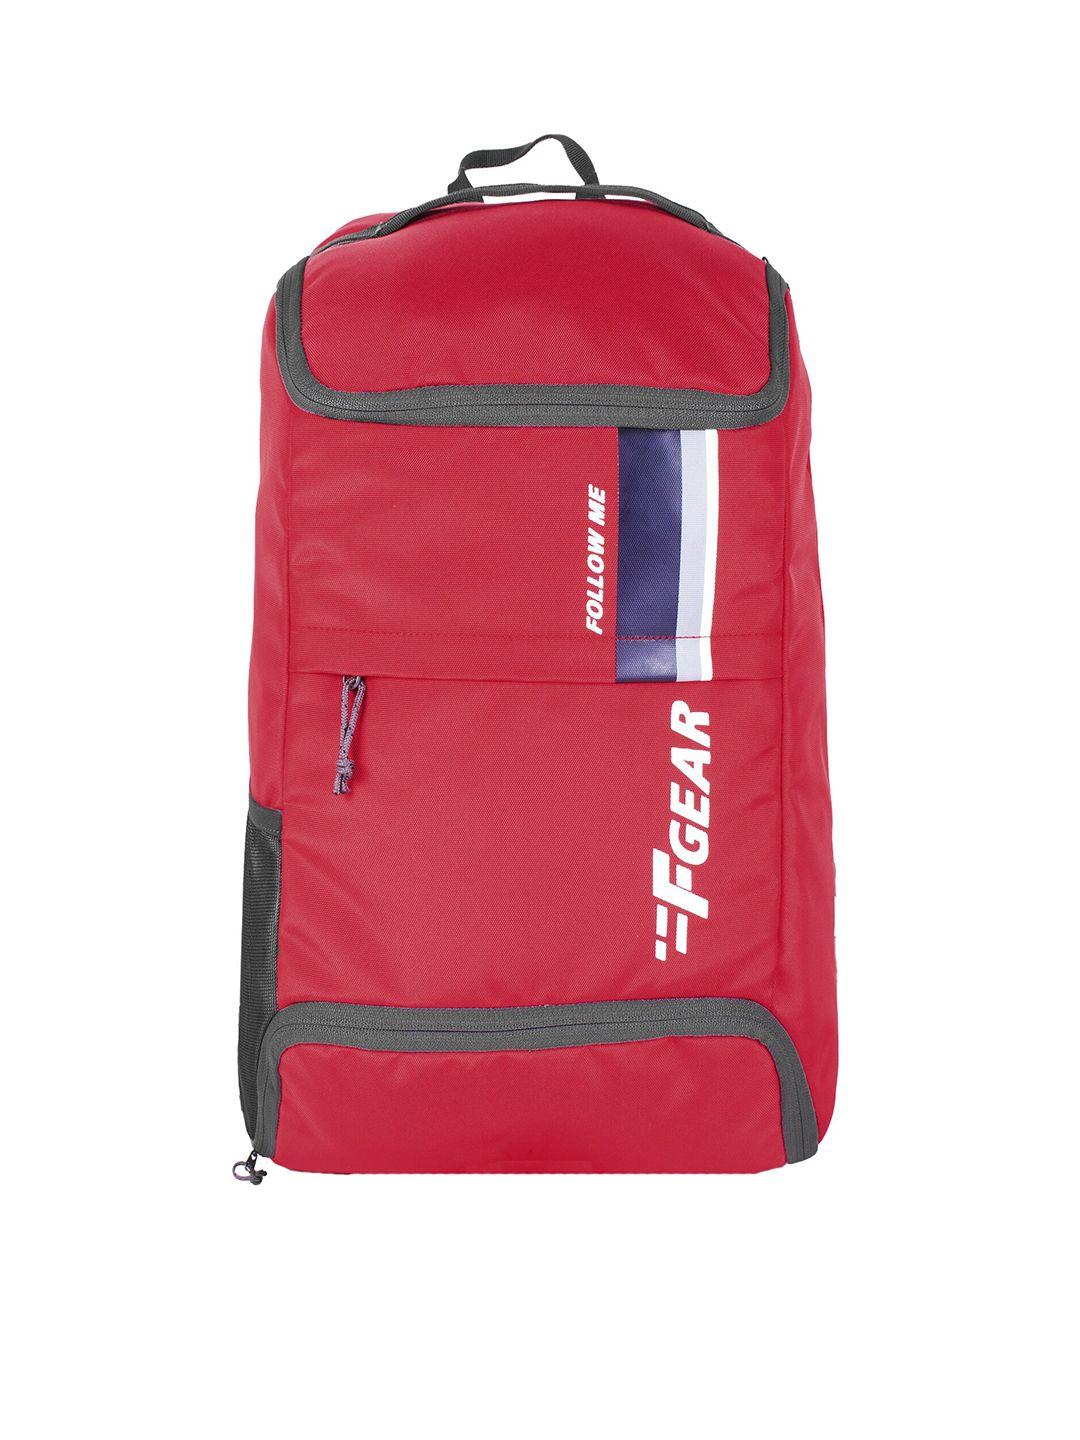 f gear unisex red & grey typography backpack